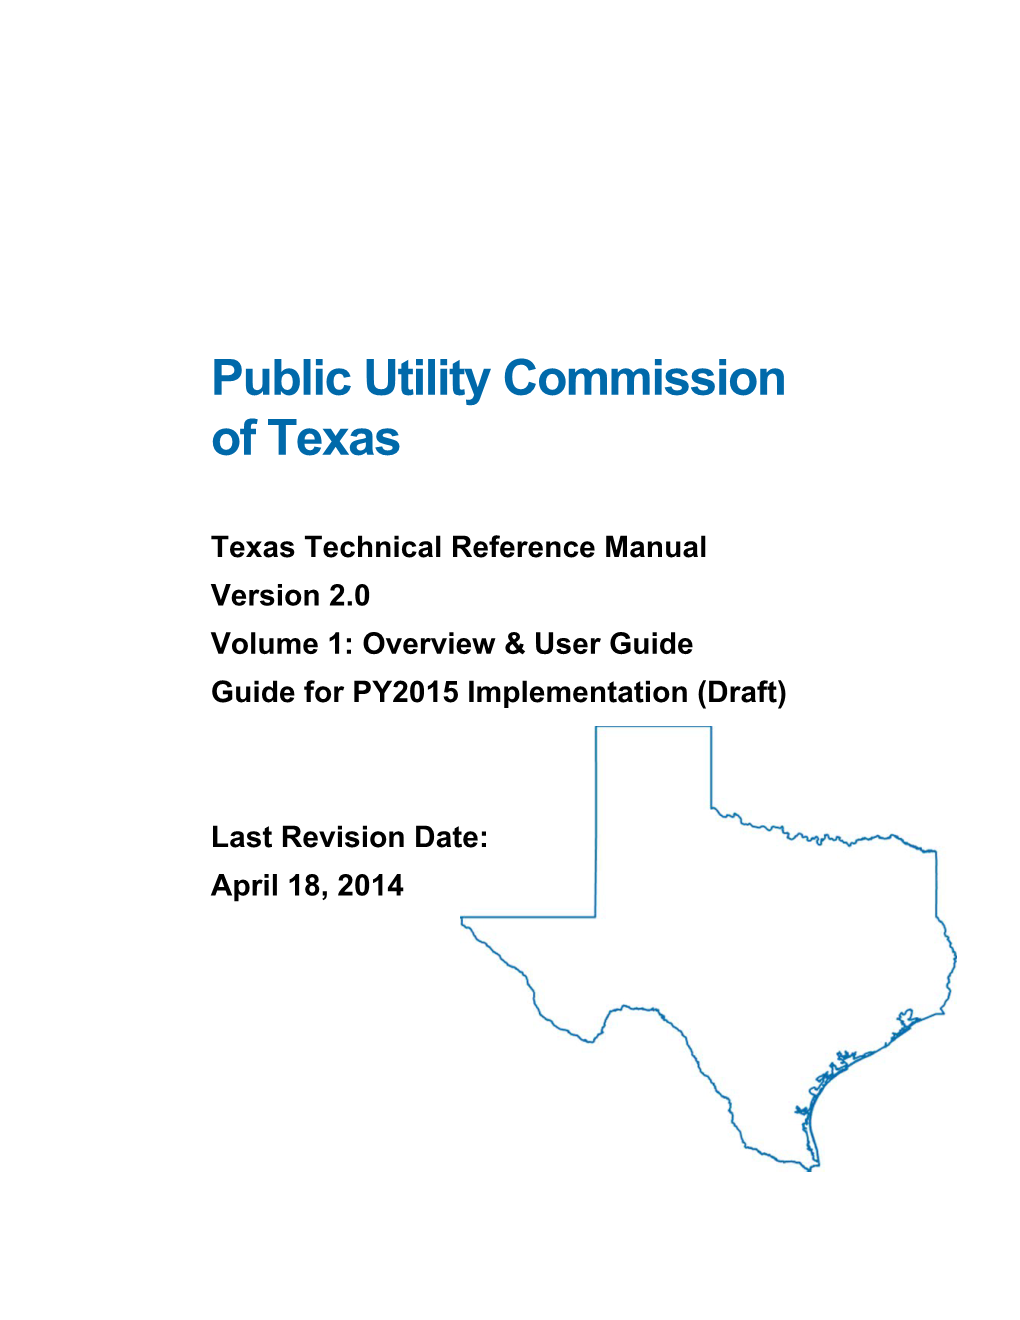 Texas Technical Reference Manual